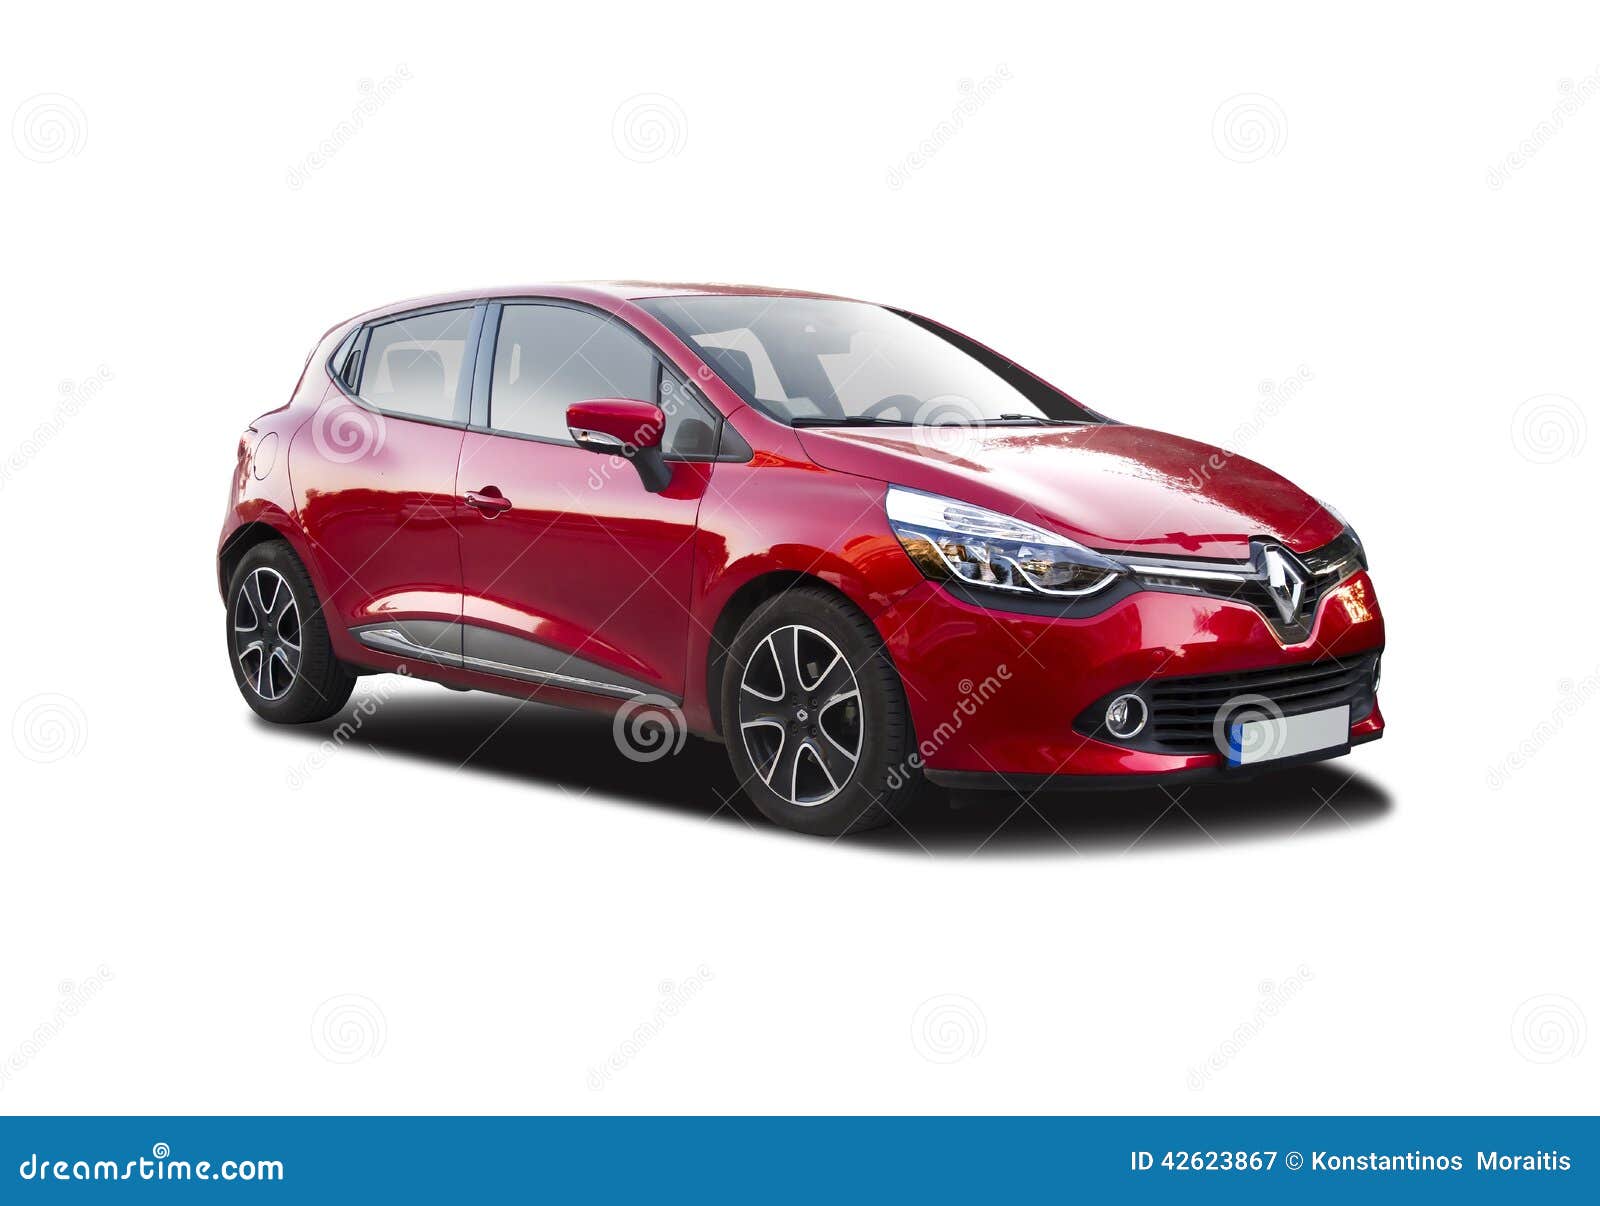 Renault Clio Isolated on White Stock Image - Image of european, french:  64911181